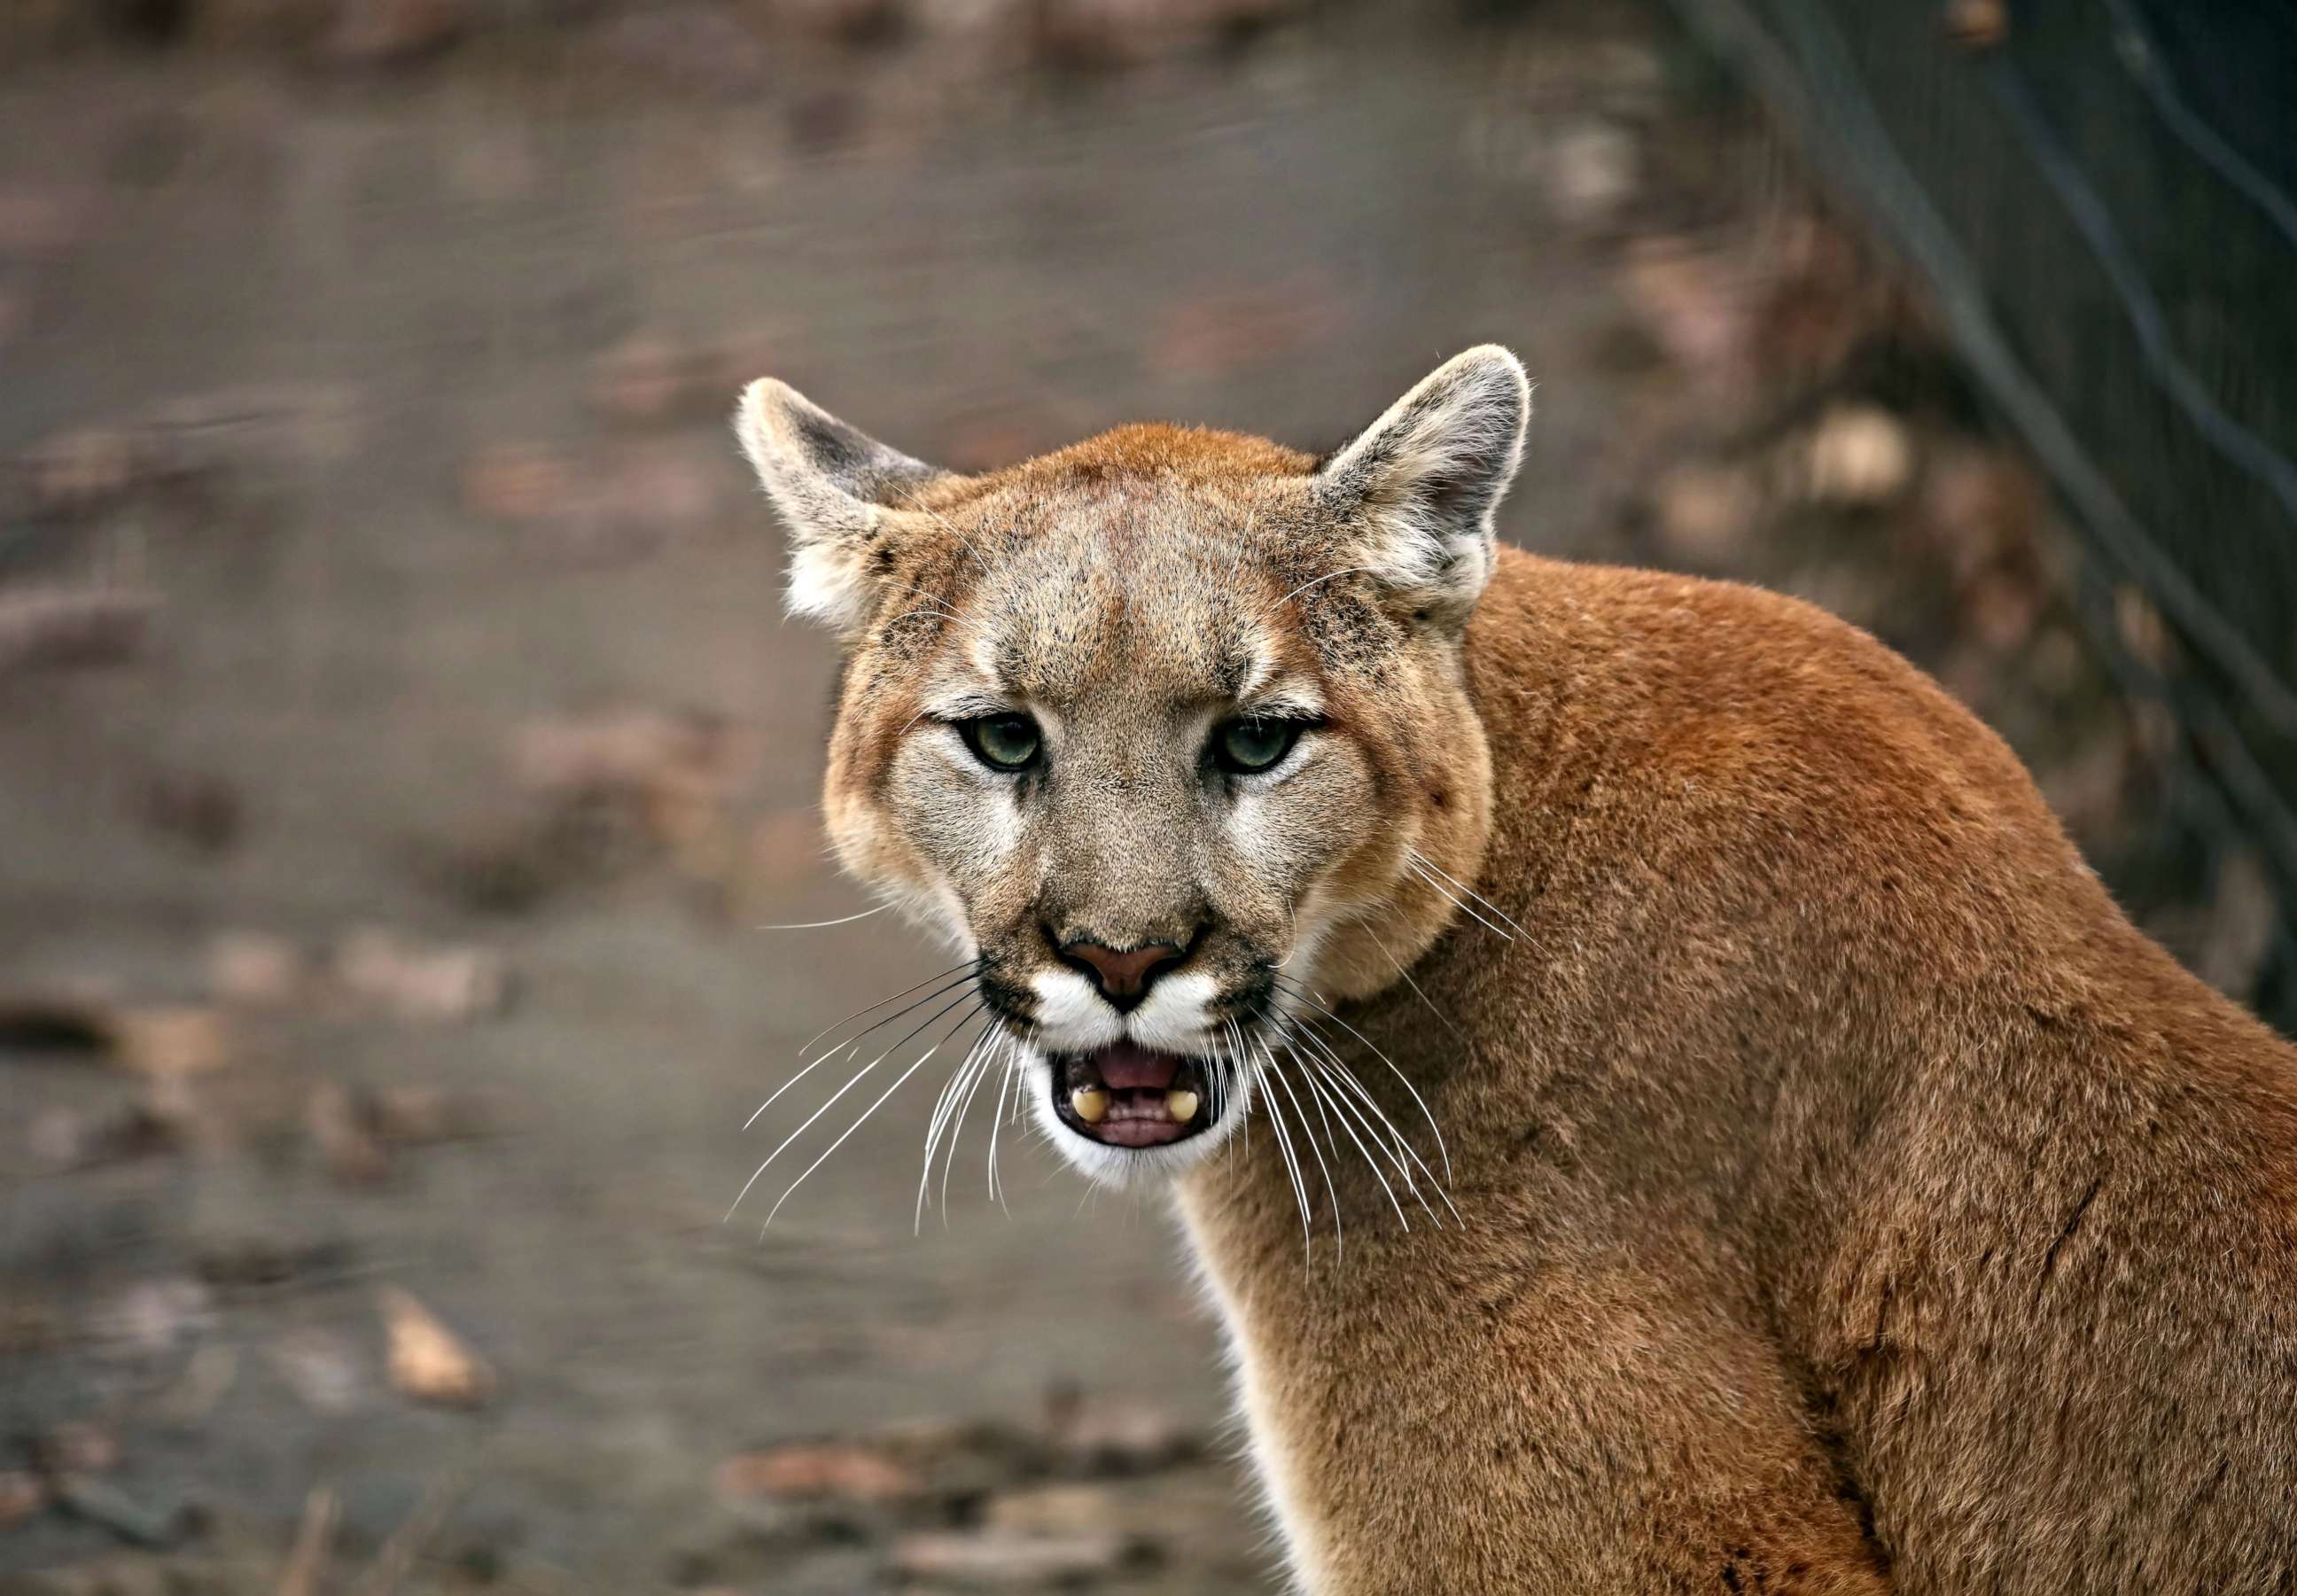 PHOTO: This undated stock image of a cougar, also known by other names including catamount, mountain lion, panther and puma is American native animal. Authorities are looking for the one that attacked a girl in a California park on Sunday, Feb. 16, 2020.